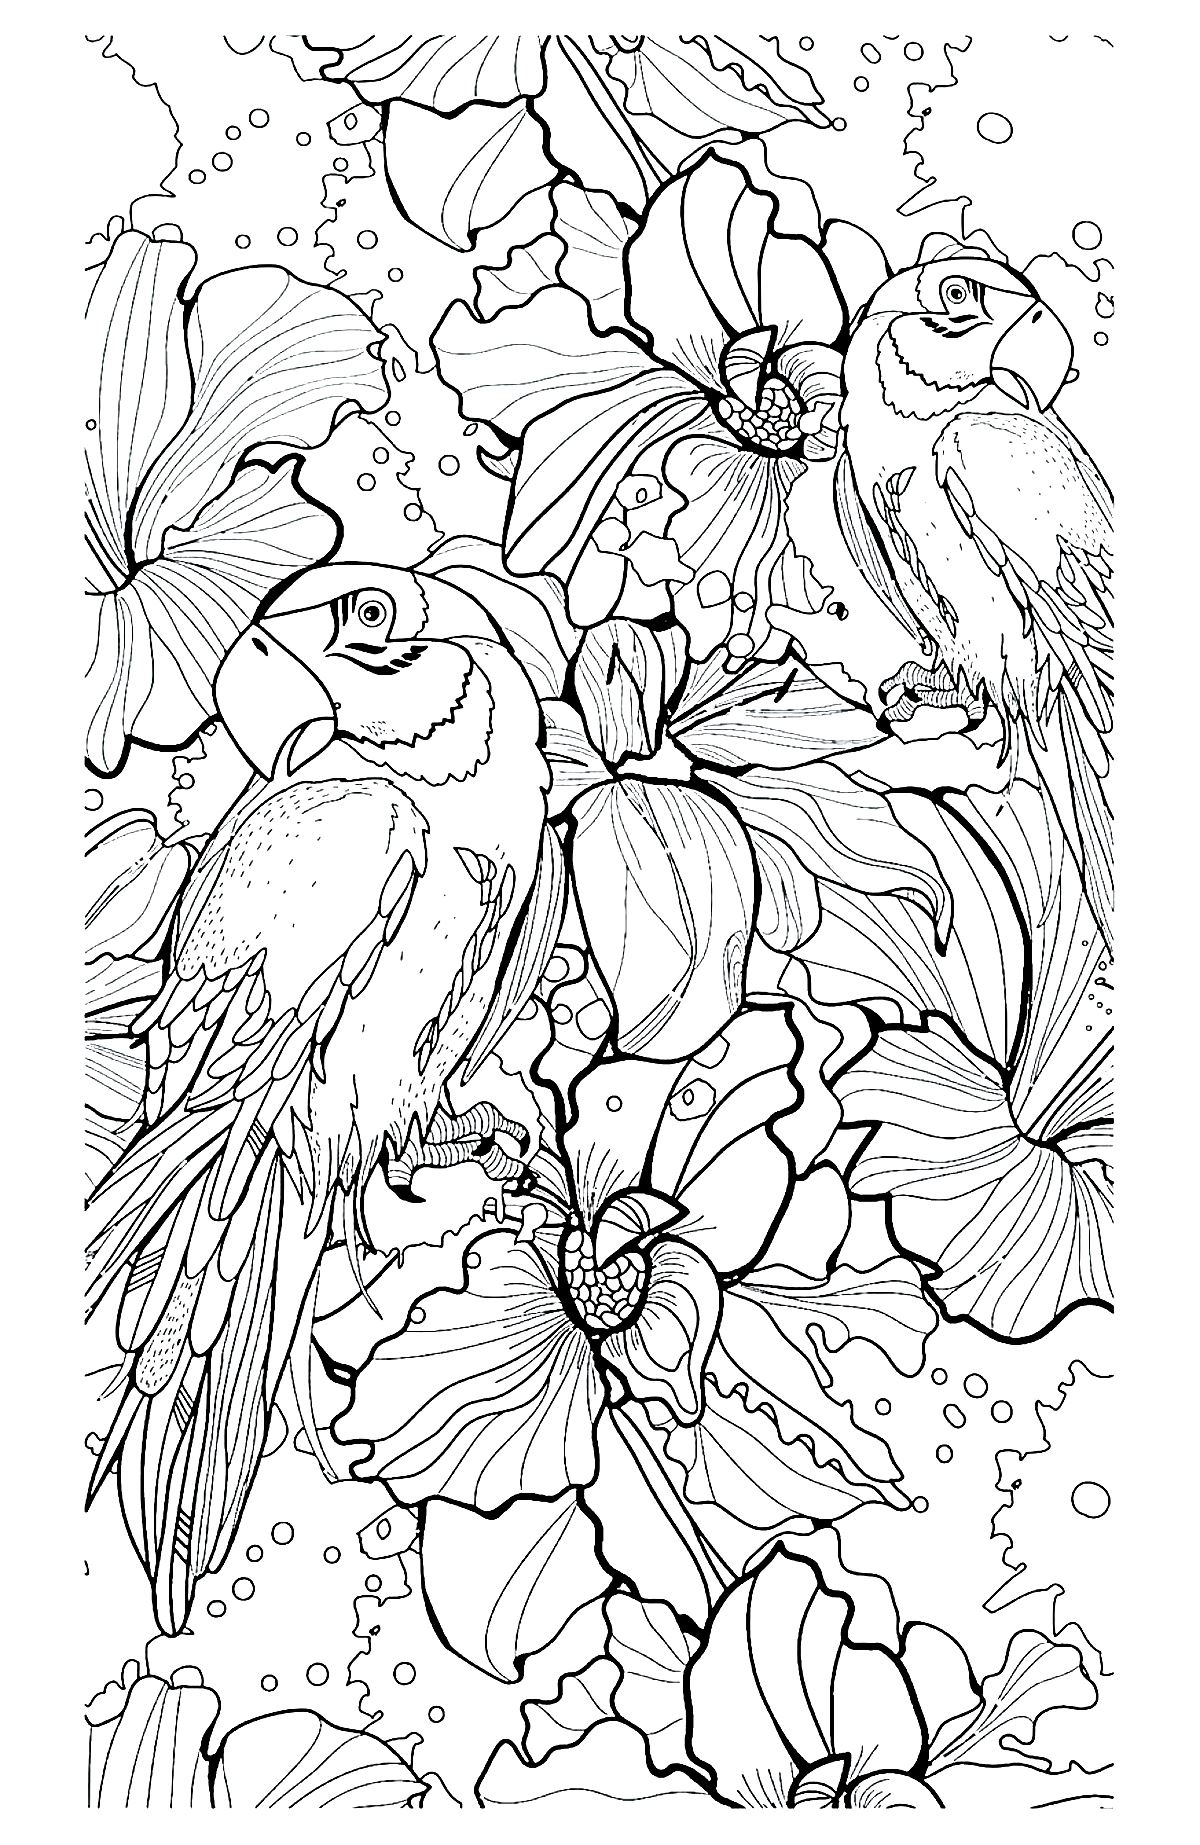 Parrot difficult - Birds Adult Coloring Pages